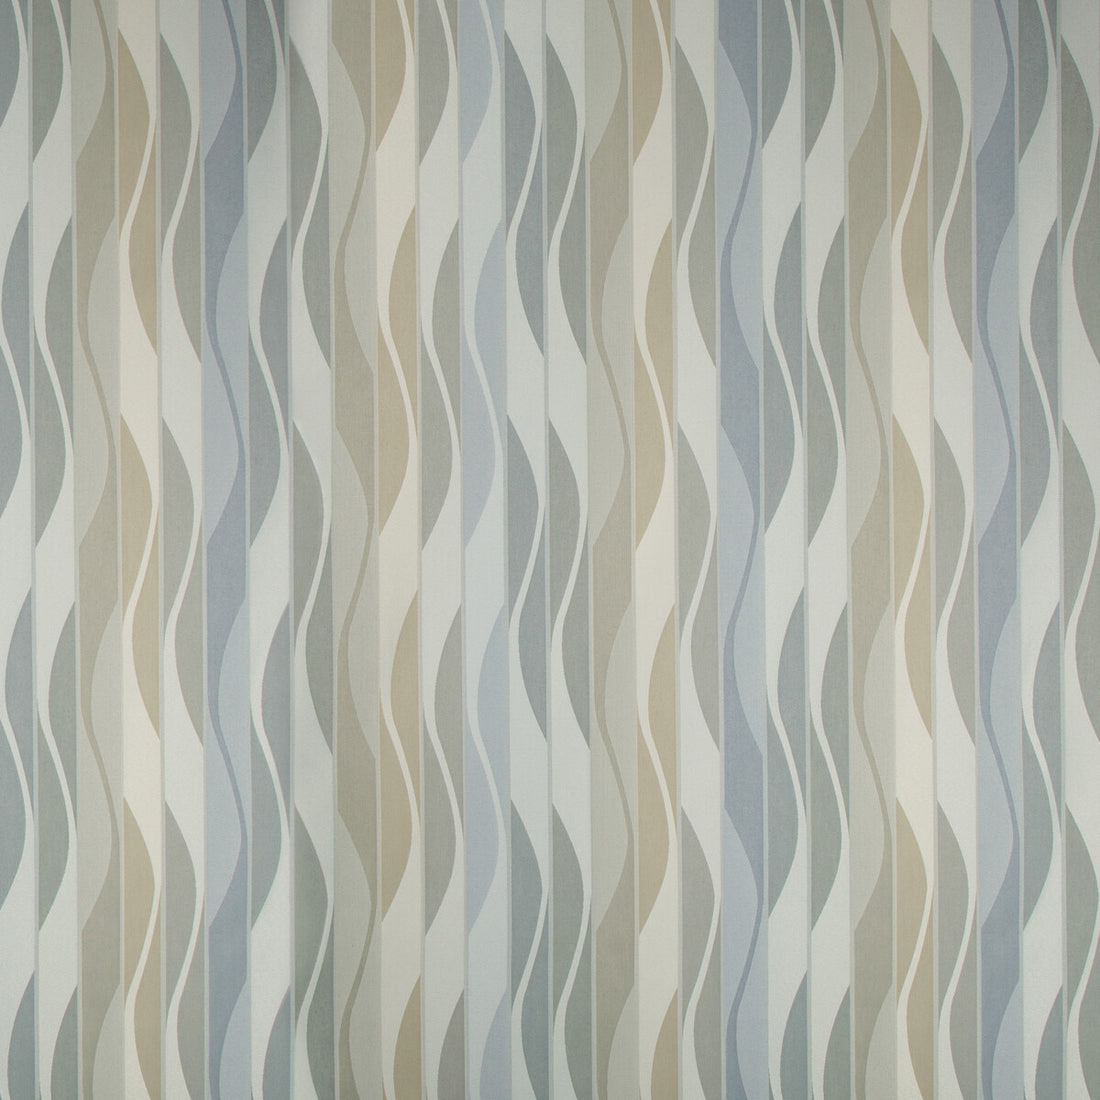 Wave Hill fabric in moonlight color - pattern 4232.11.0 - by Kravet Contract in the Privacy Curtains collection